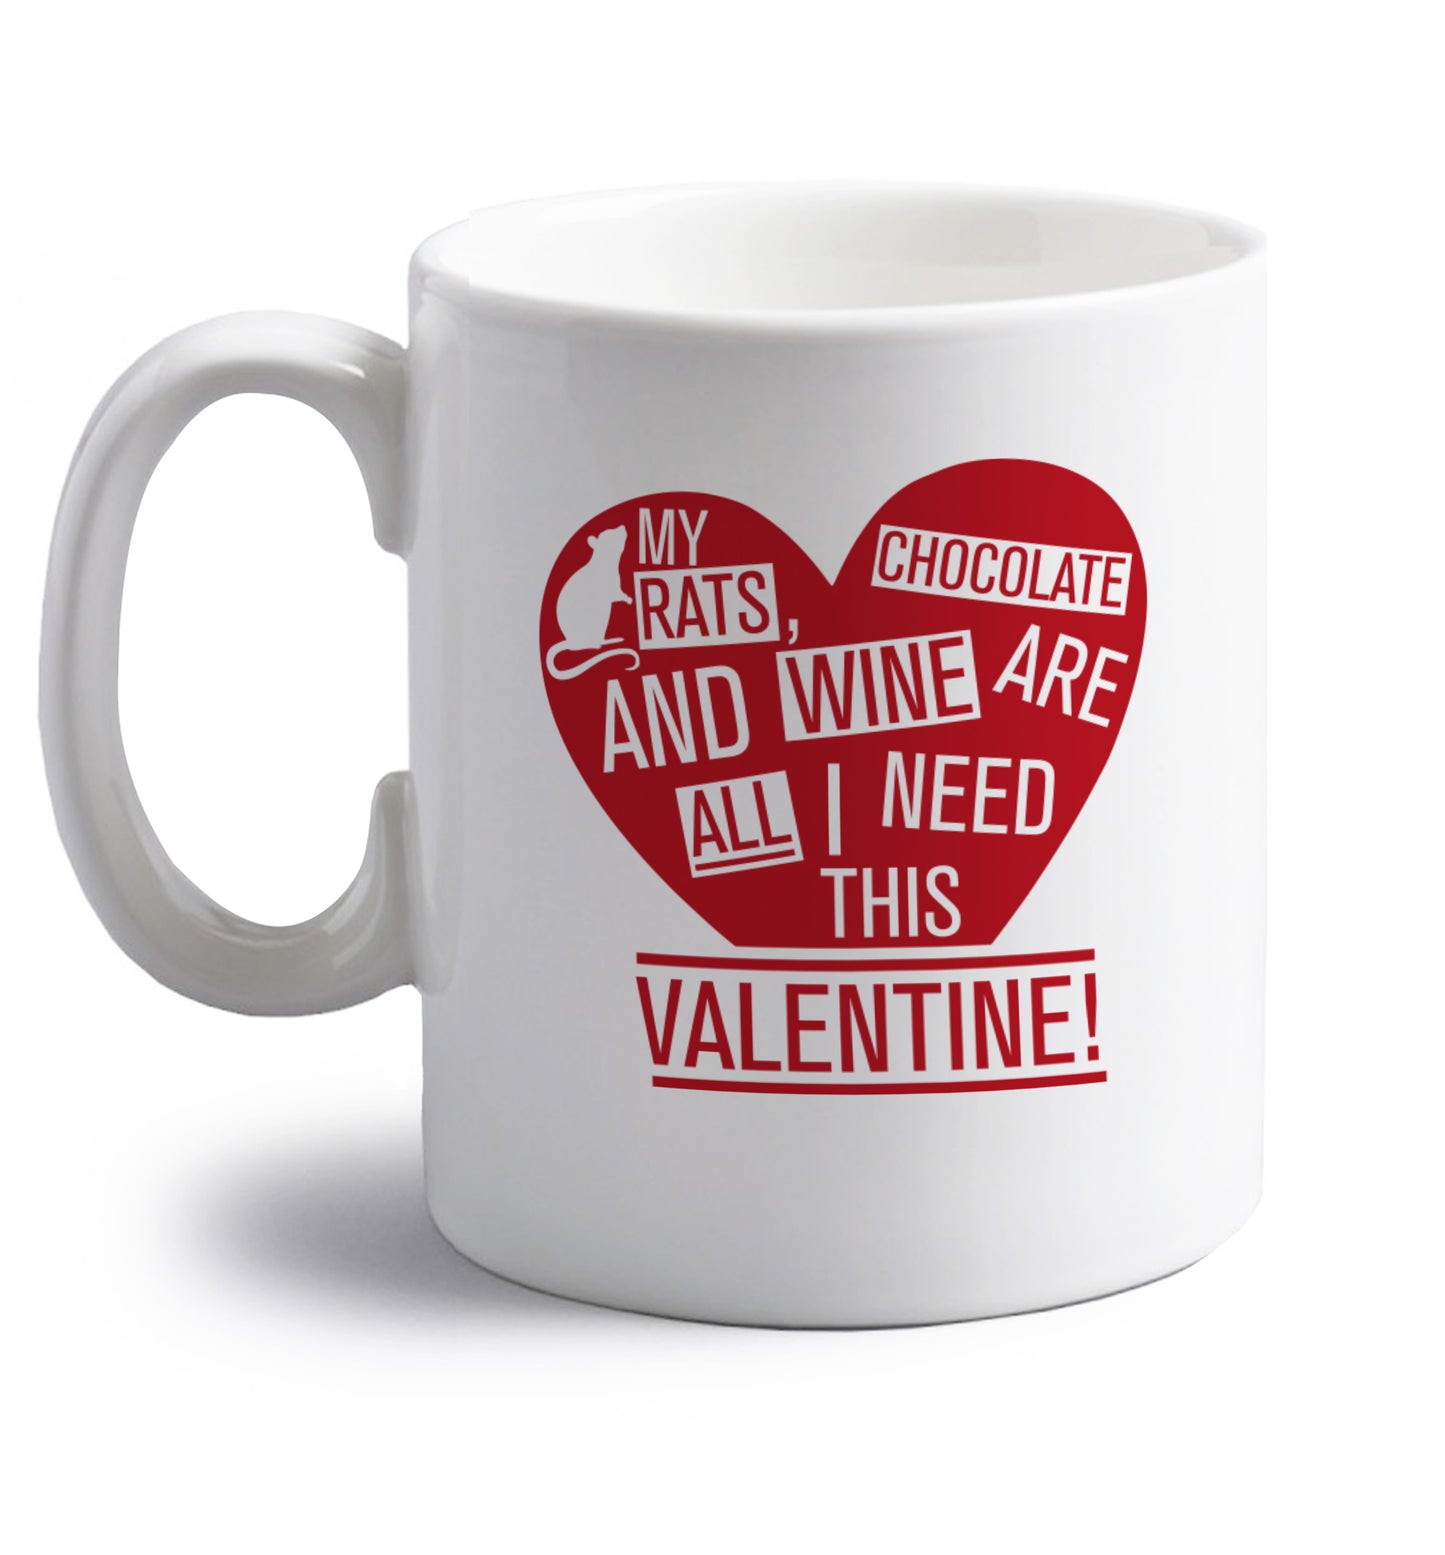 My rats, chocolate and wine are all I need this valentine! right handed white ceramic mug 